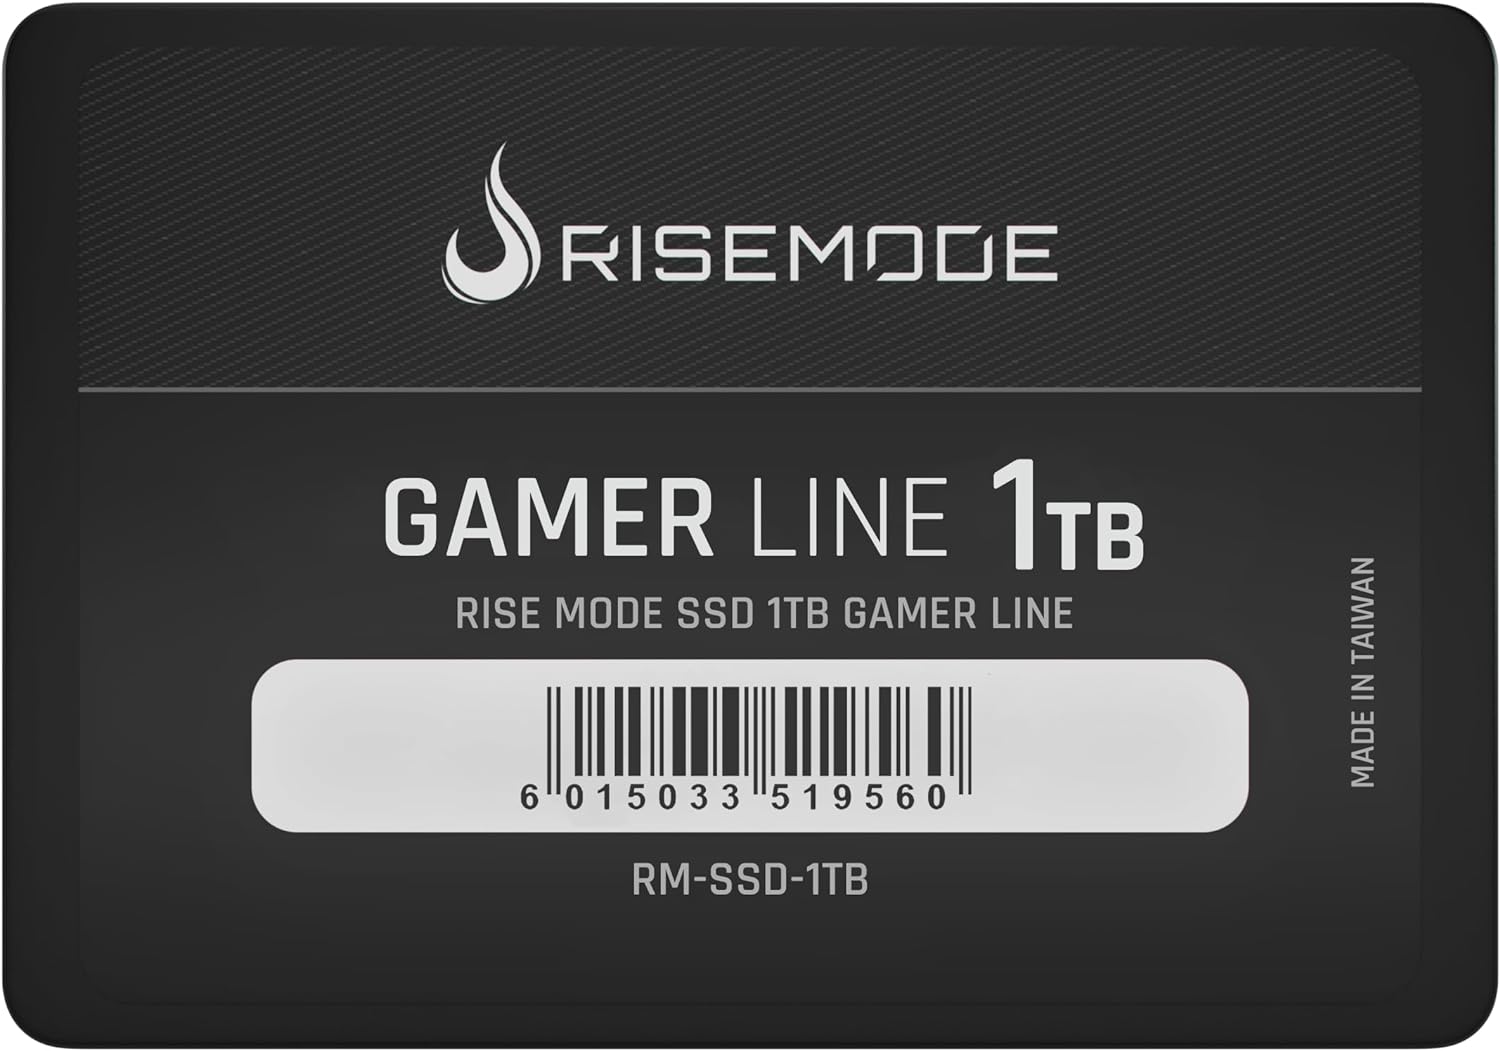 Rise Mode USA SSD Sata III 1TB Internal Solid State Drive Game Line Desktop PC or Laptop 2.5